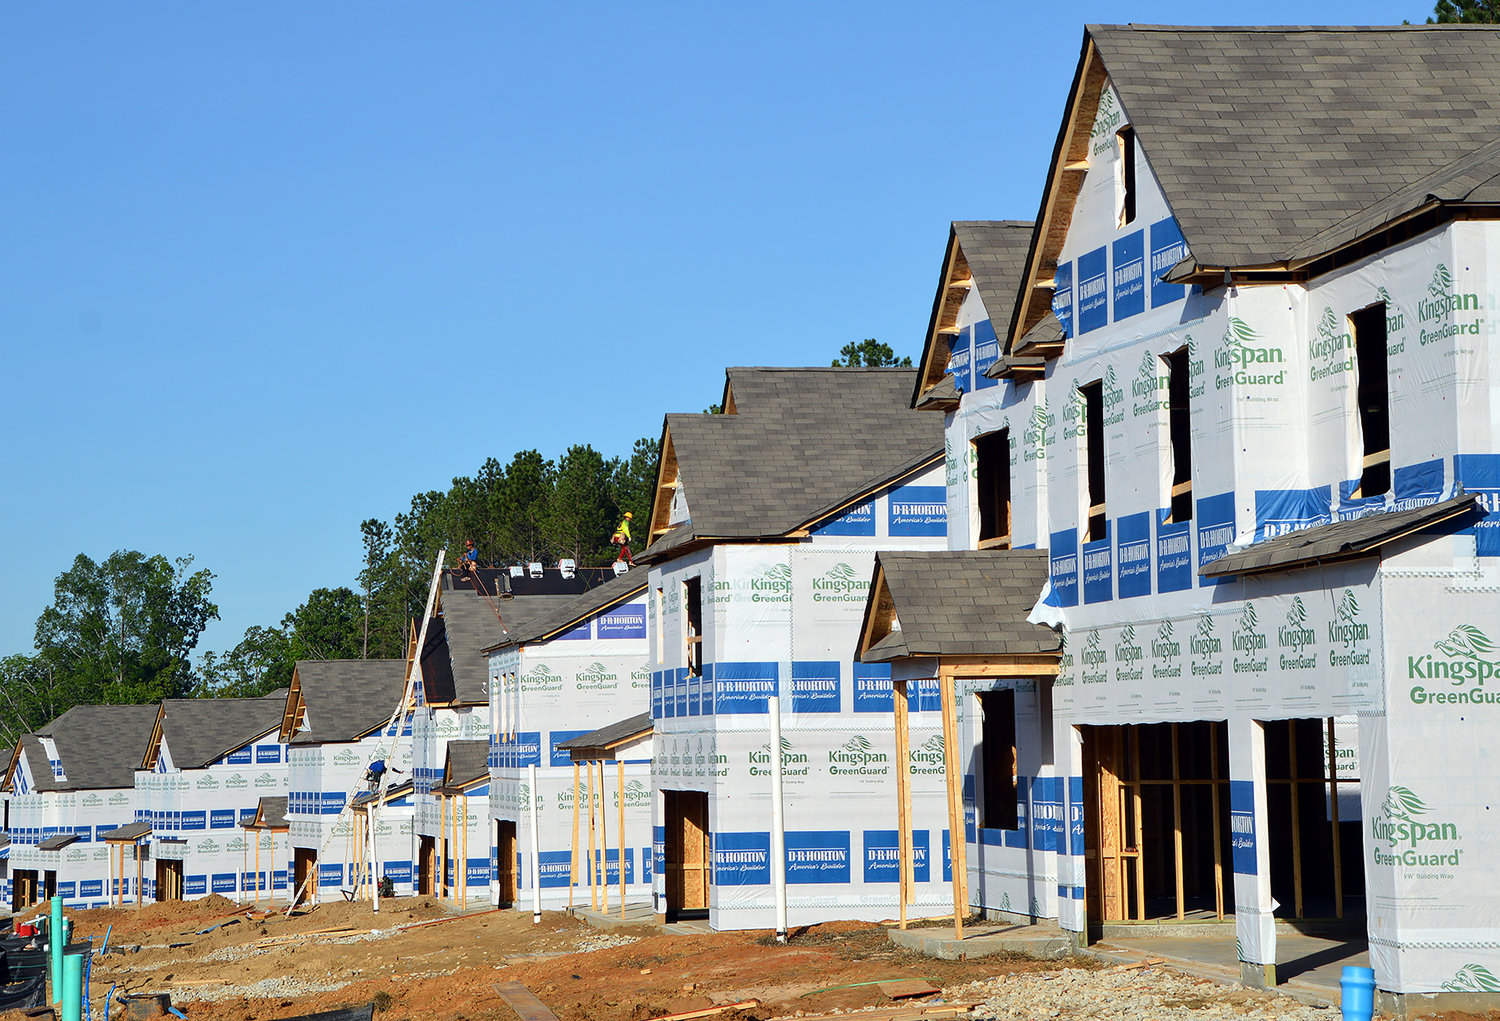 Roofers work on houses under construction in a new subdivision in Dallas, Ga., June 10, 2022. (Index/Henry Durand)